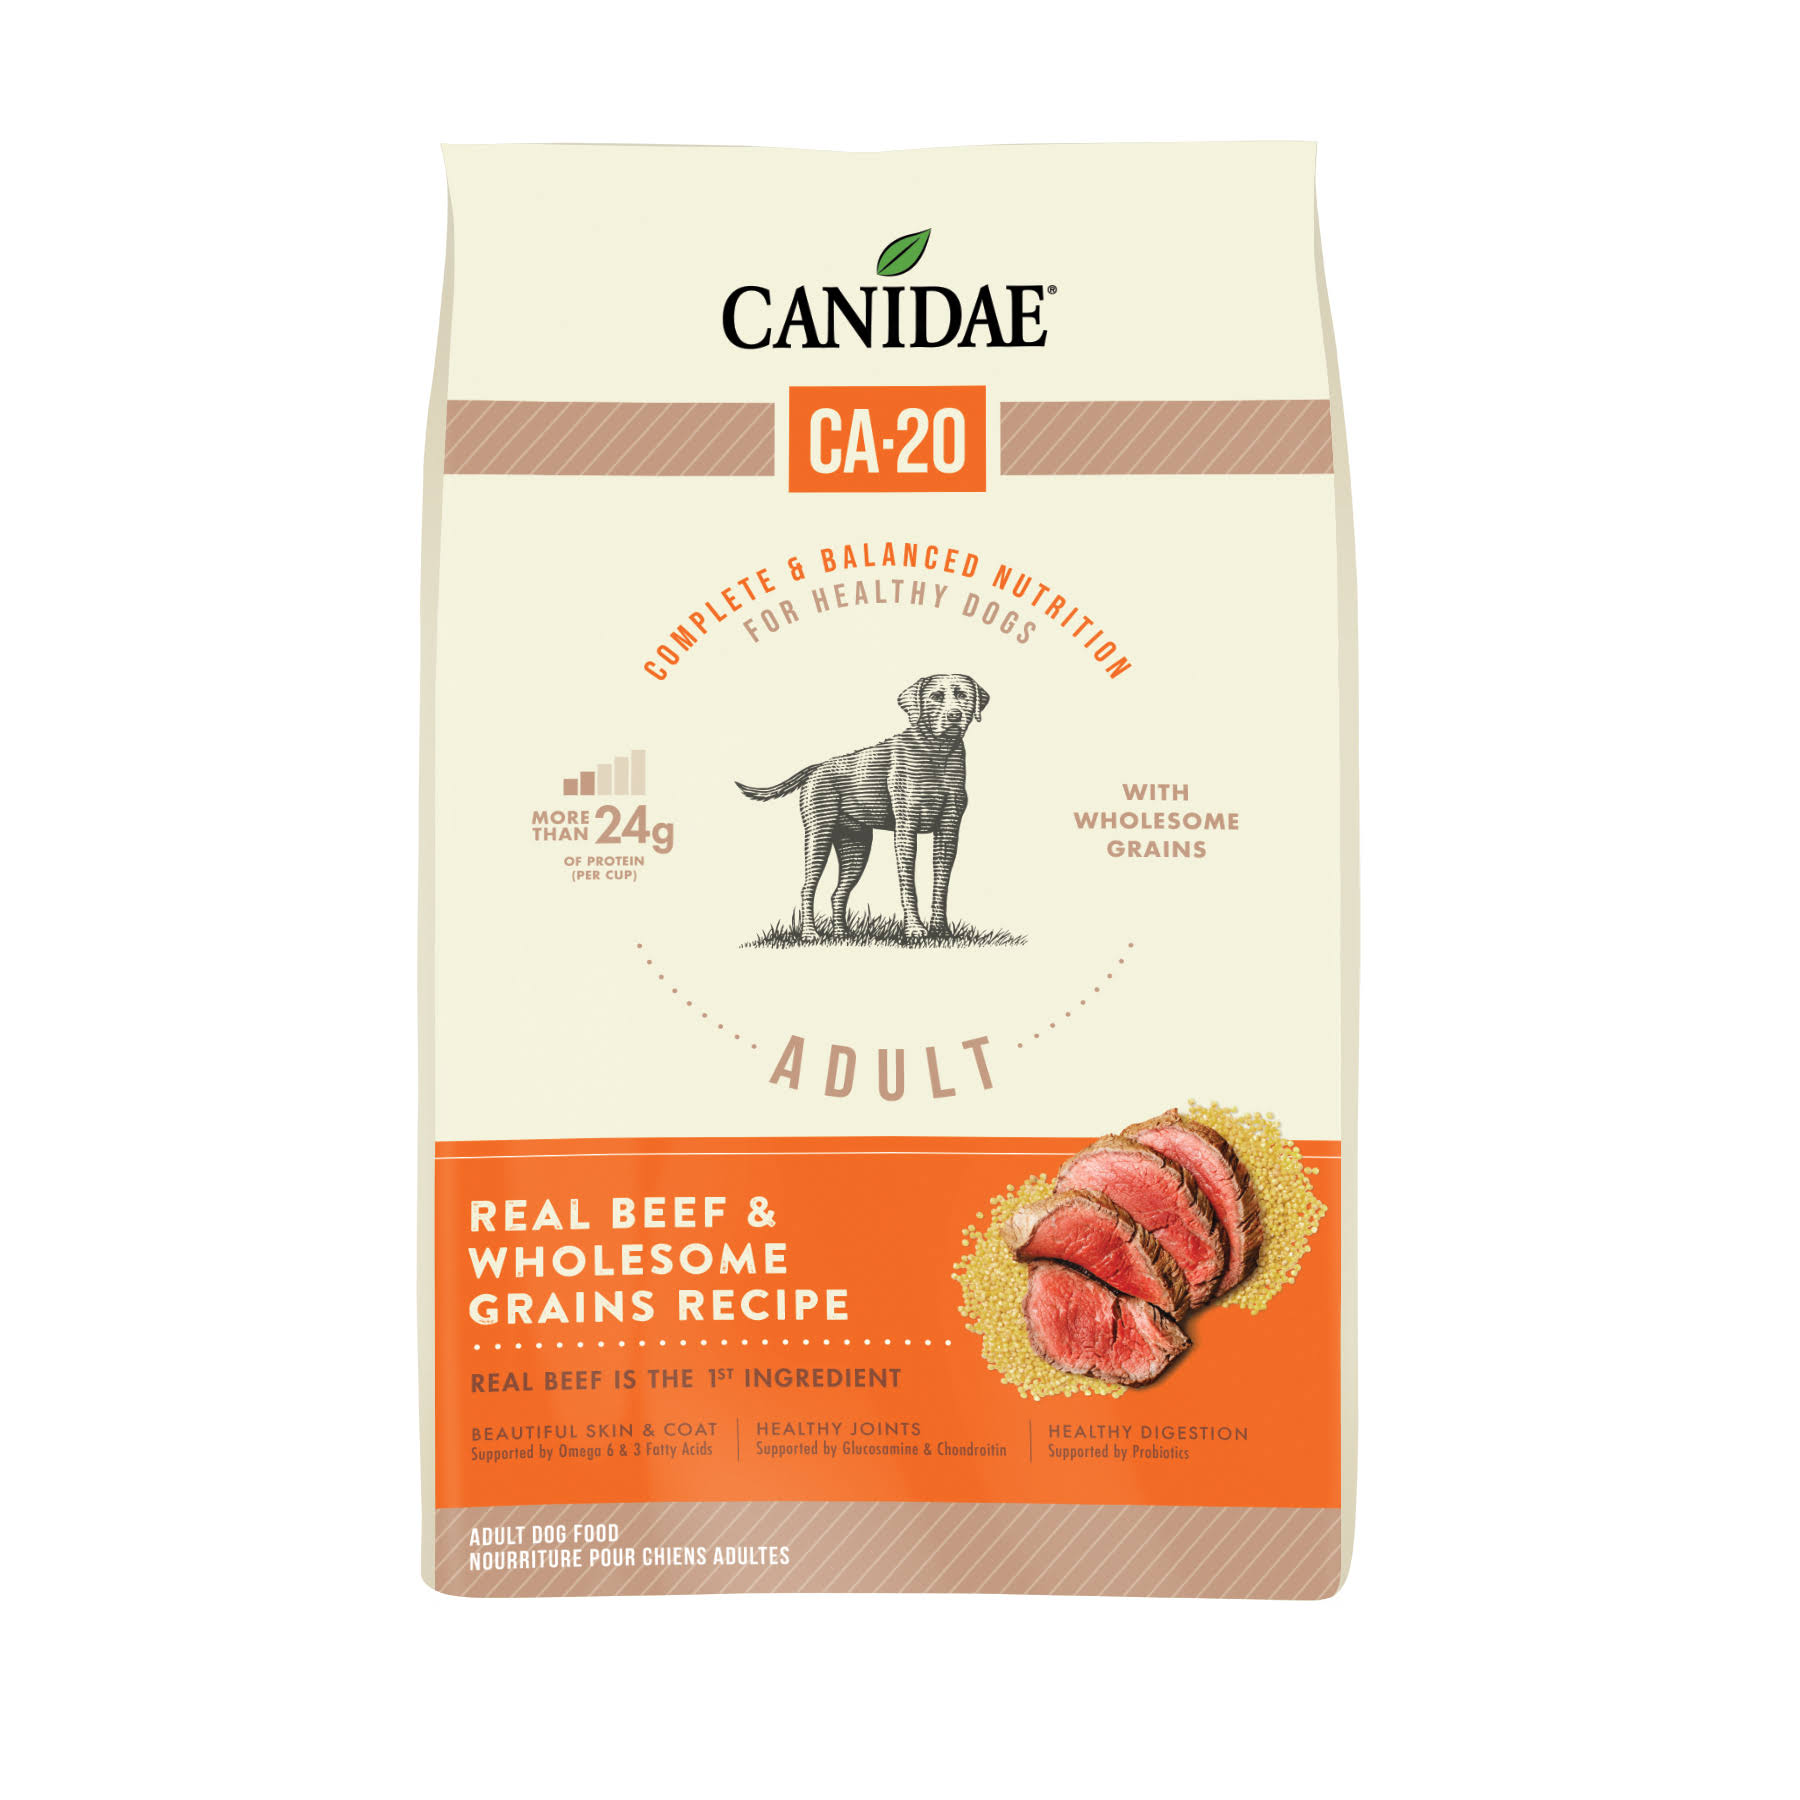 Canidae CA-20 Real Beef & Wholesome Grains Recipe Dry Dog Food, 7-lb